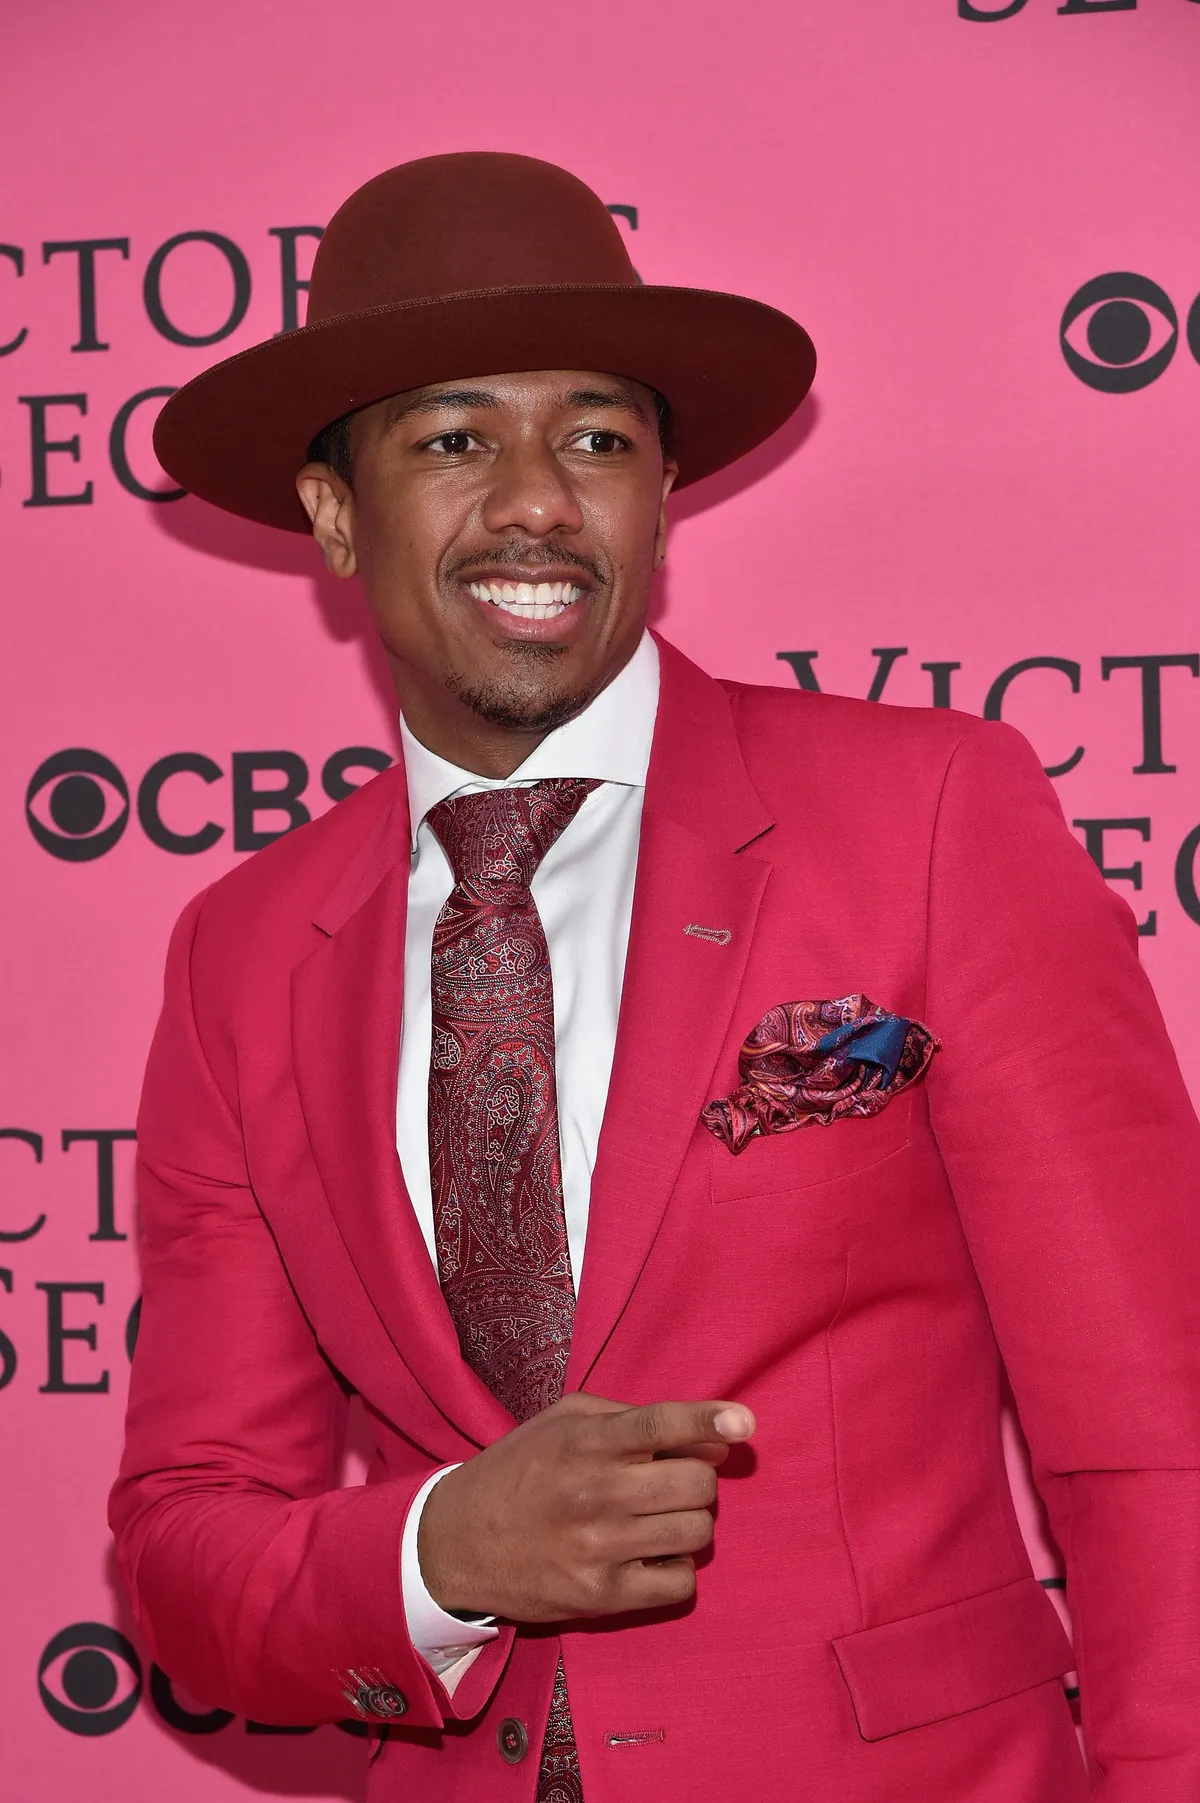 Nick Cannon arrives at the 2015 Victoria's Secret Fashion Show on November 10, 2015. | Photo: Getty Images